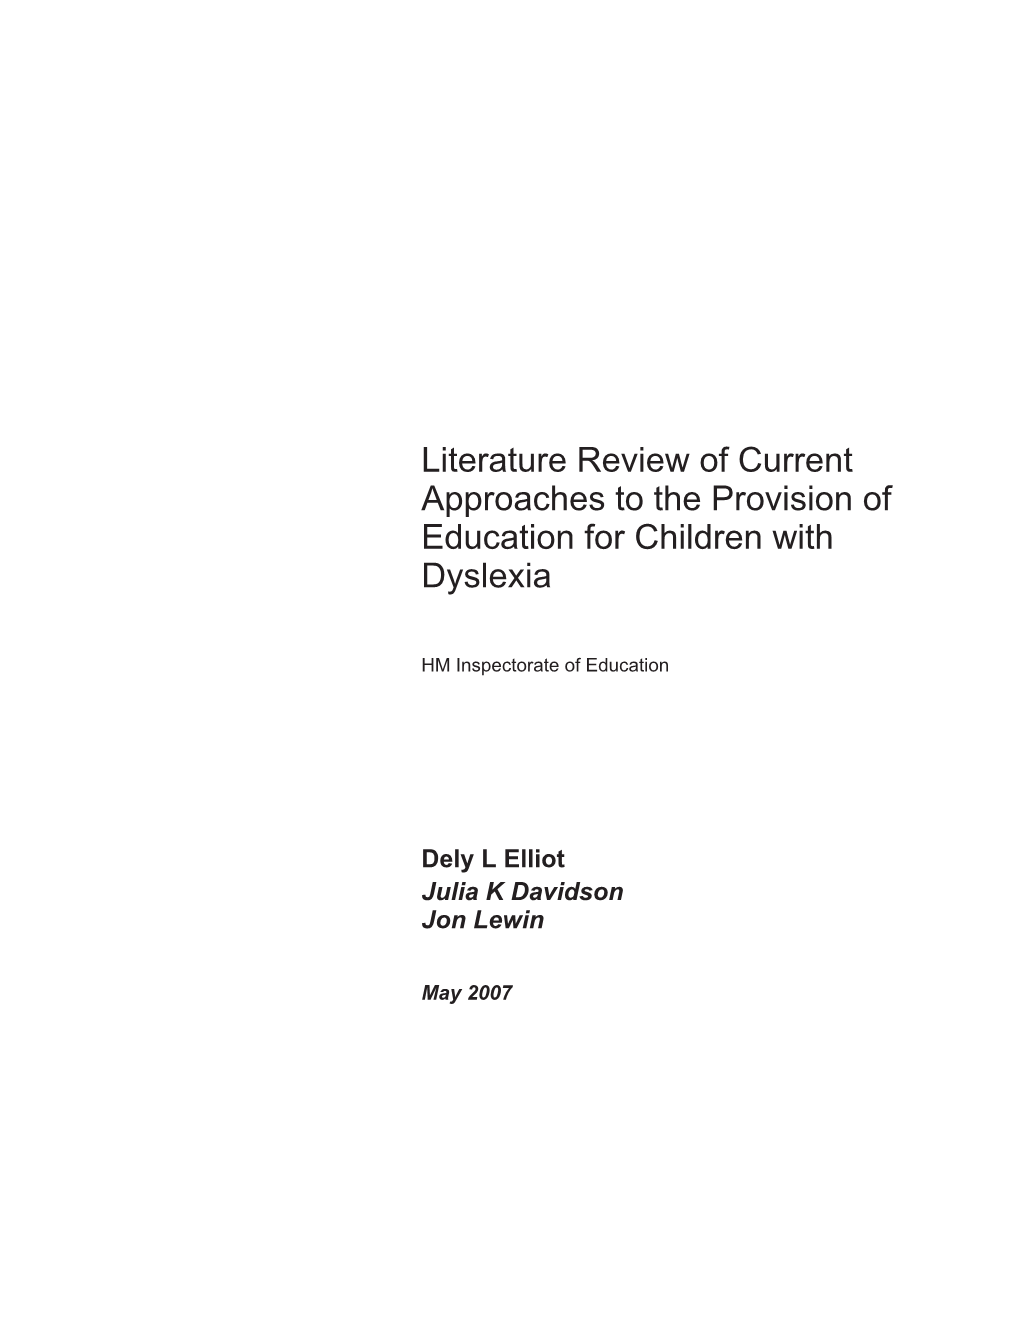 Literature Review of Current Approaches to the Provision of Education for Children with Dyslexia